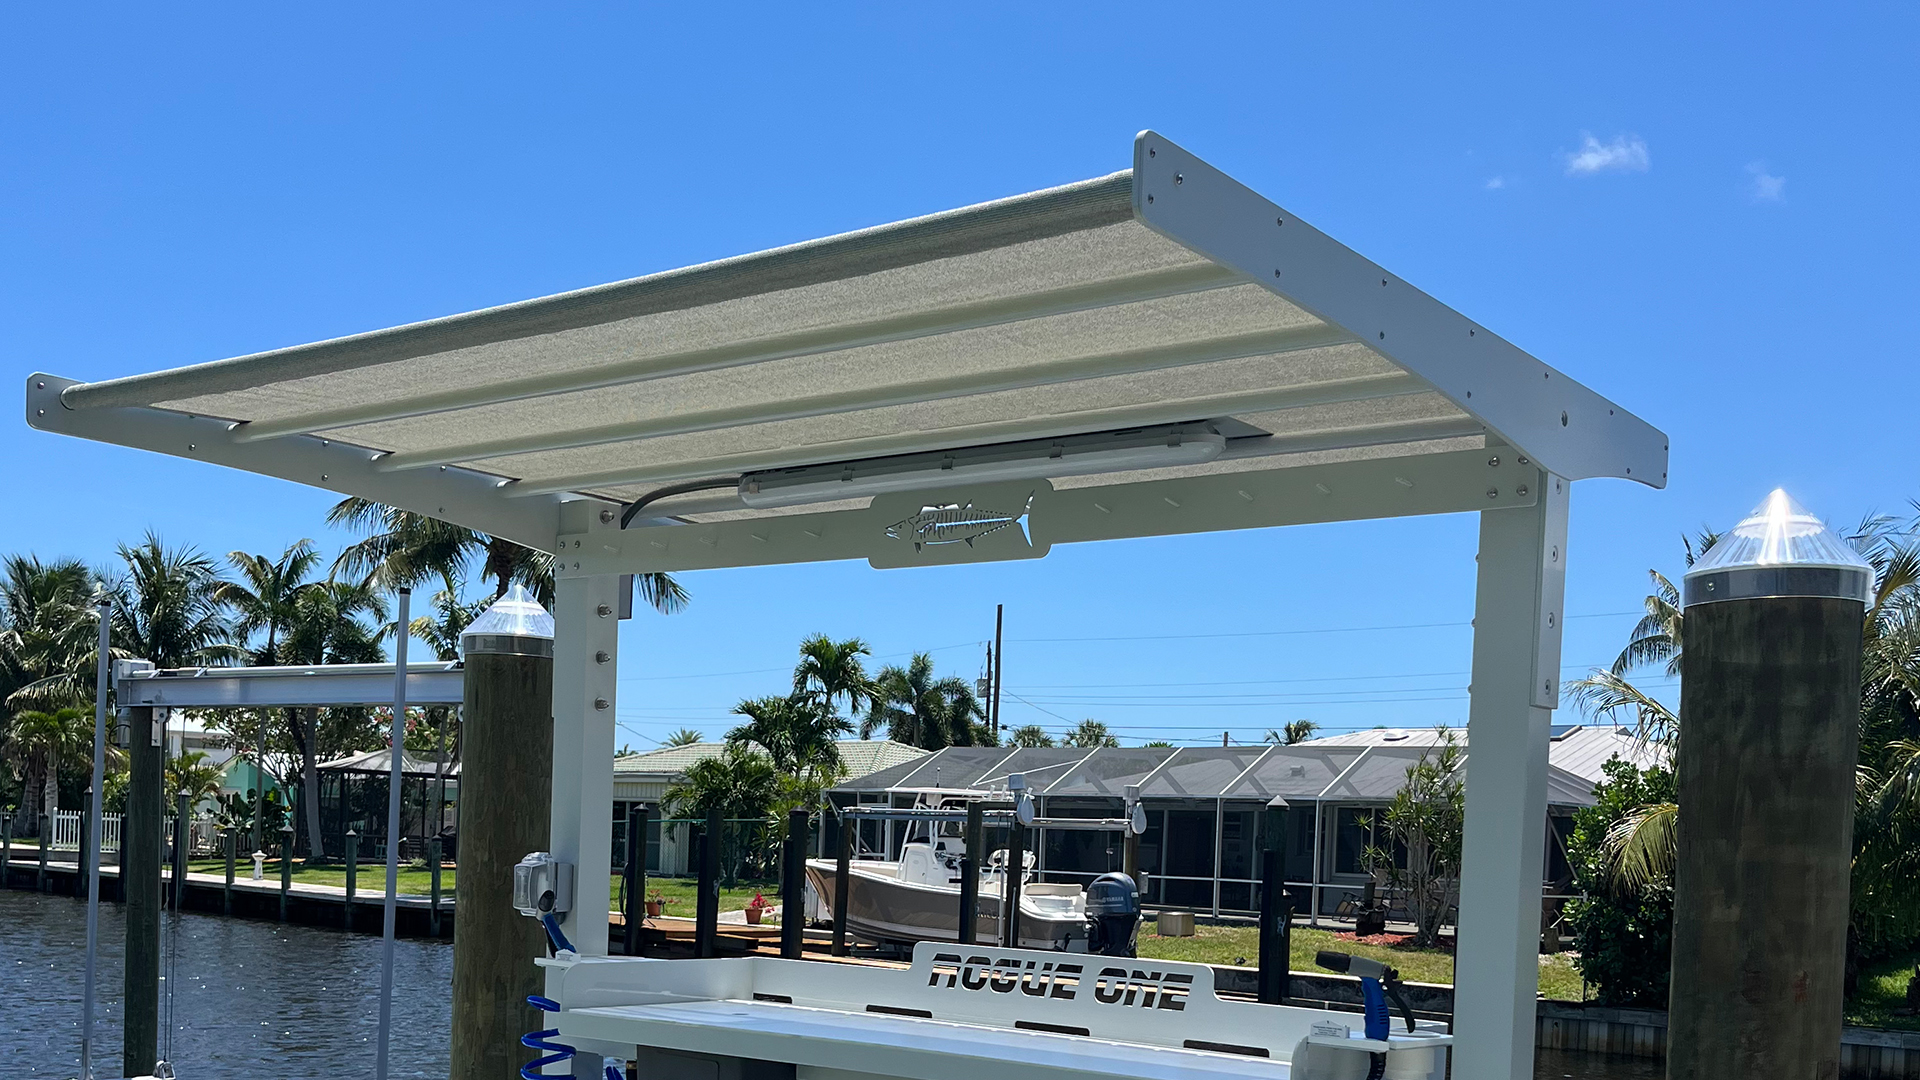 Fish Cleaning Station with Awning to cover from the sun